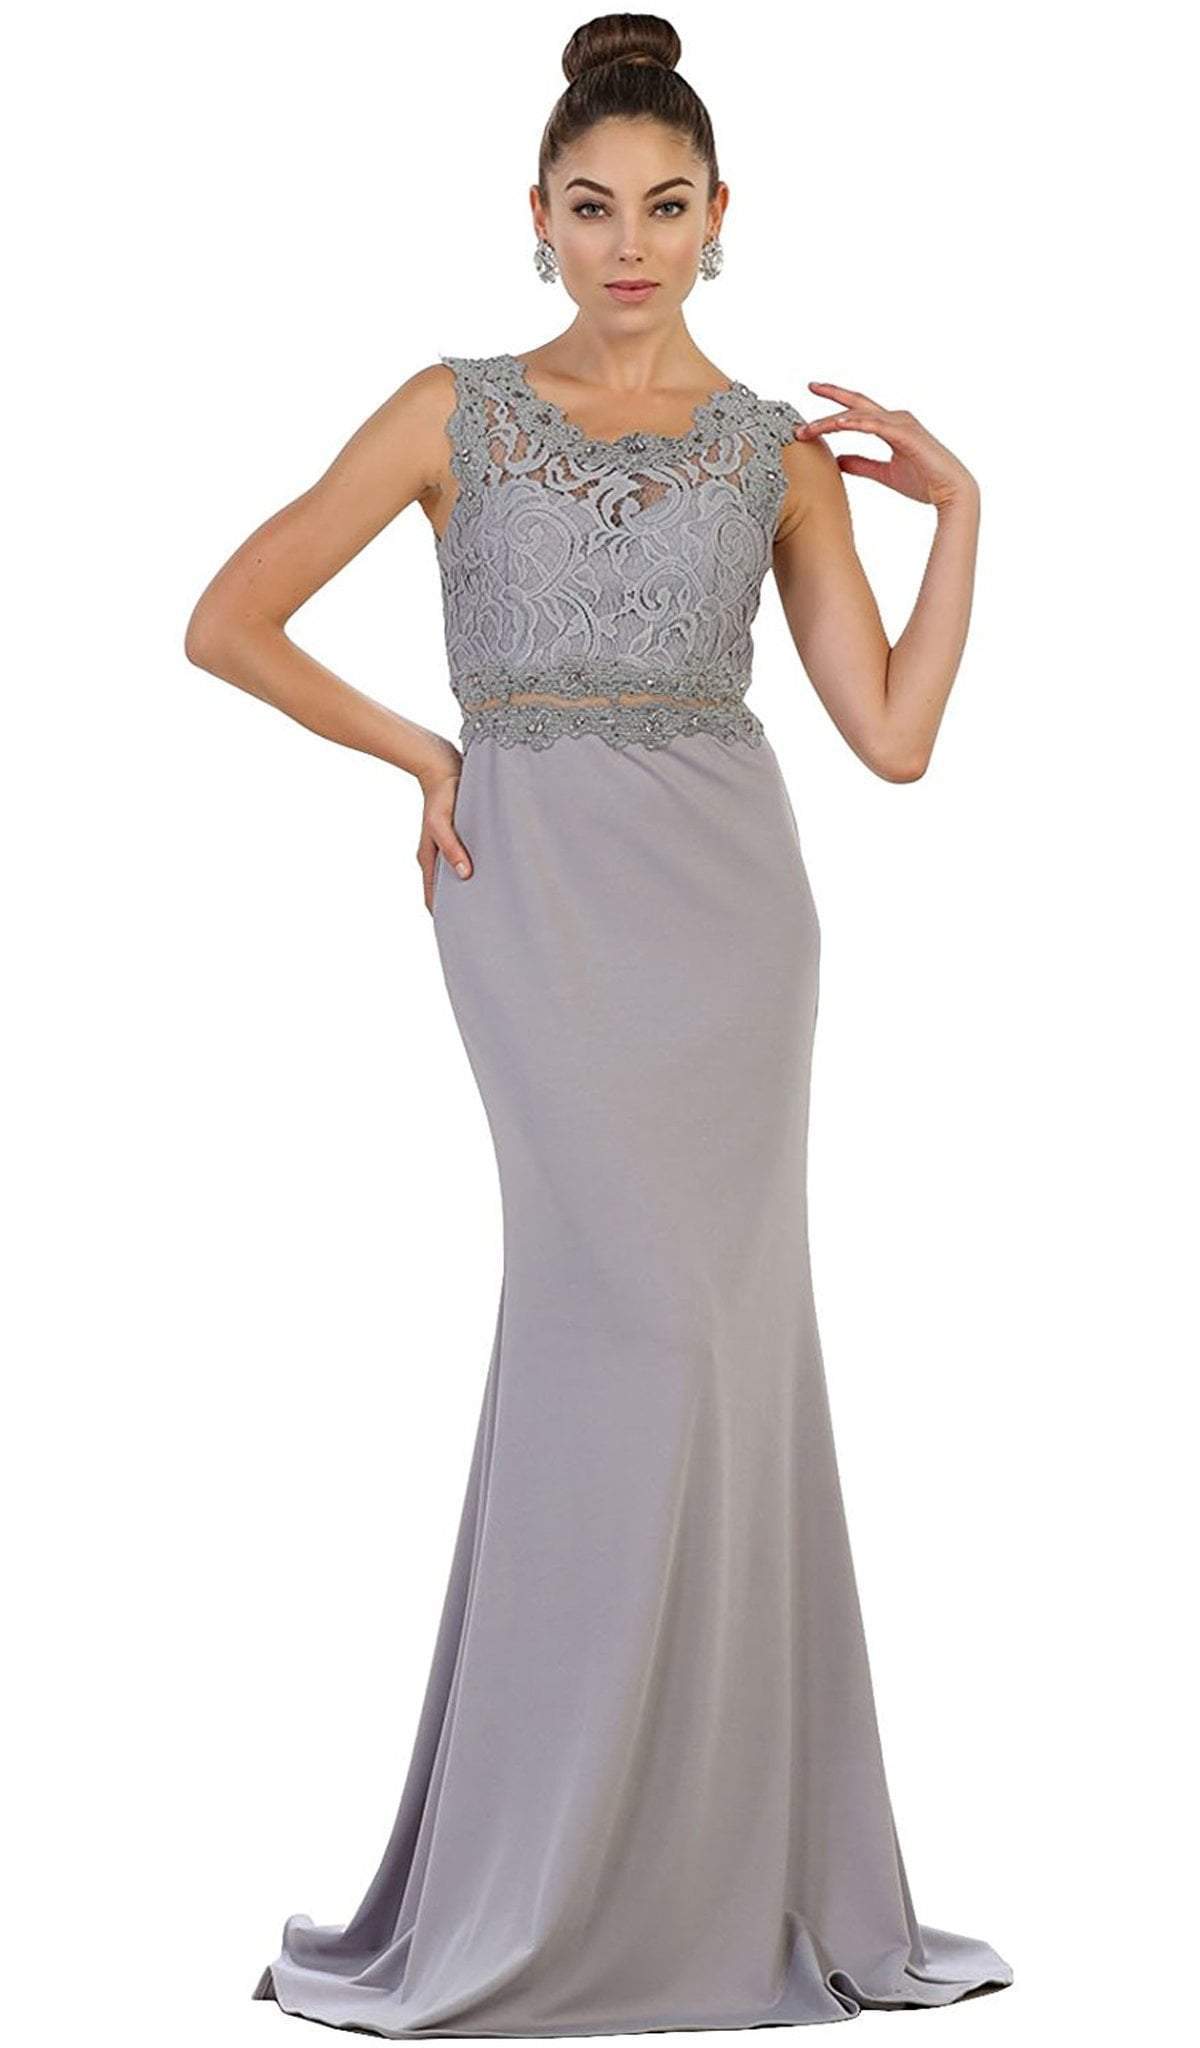 May Queen - Lace Bodice Illusion Paneled Sheath Evening Gown – Couture ...